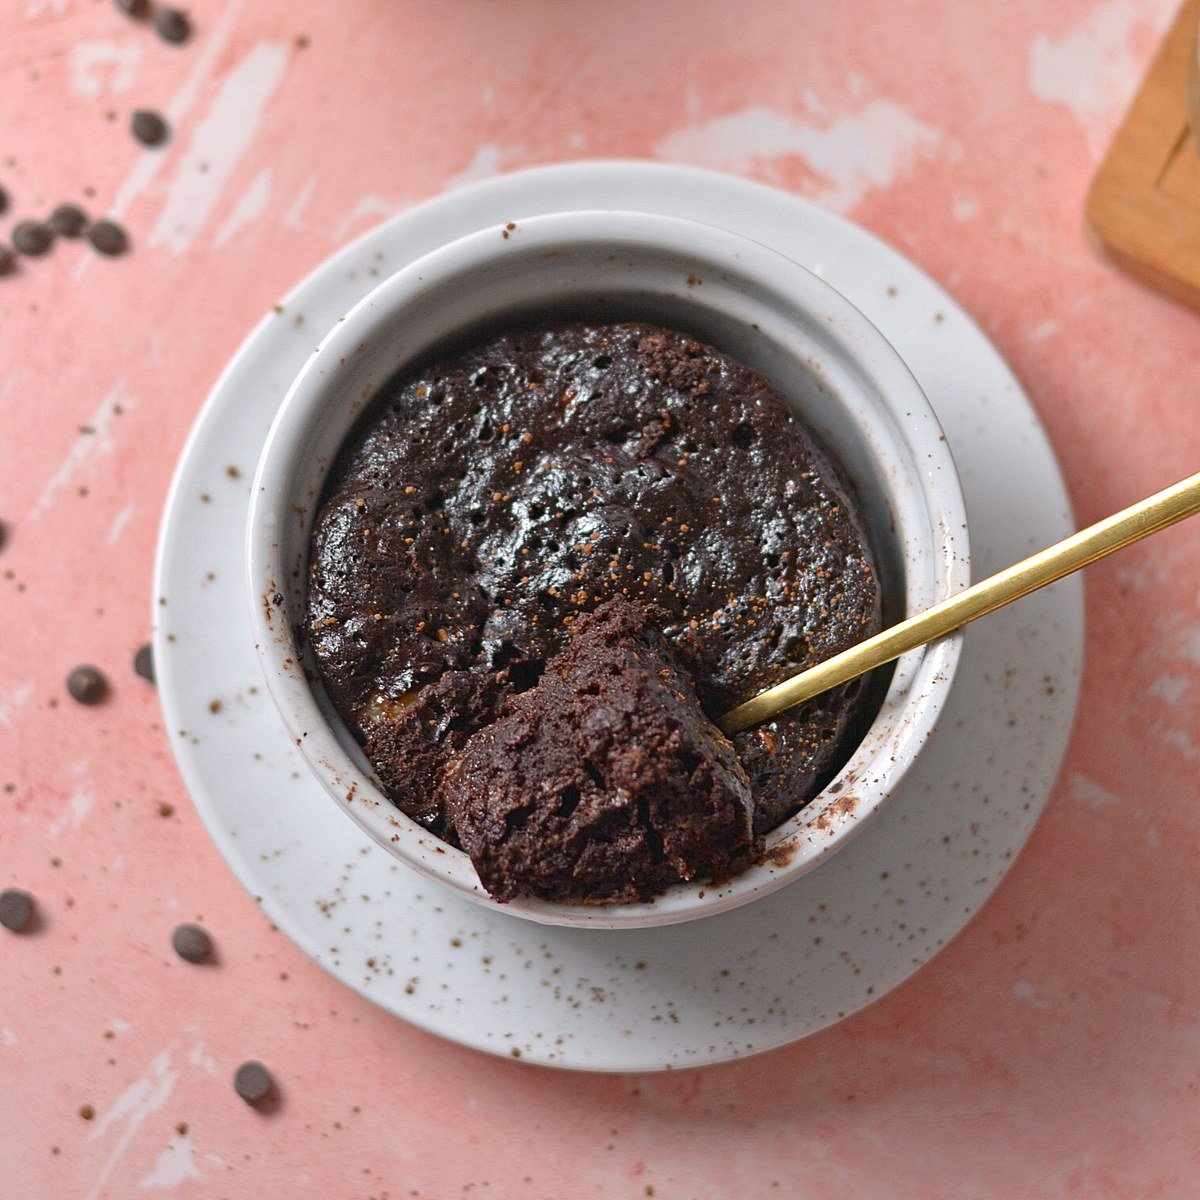 Chocolate banana mug cake with a scoop taken out of it.